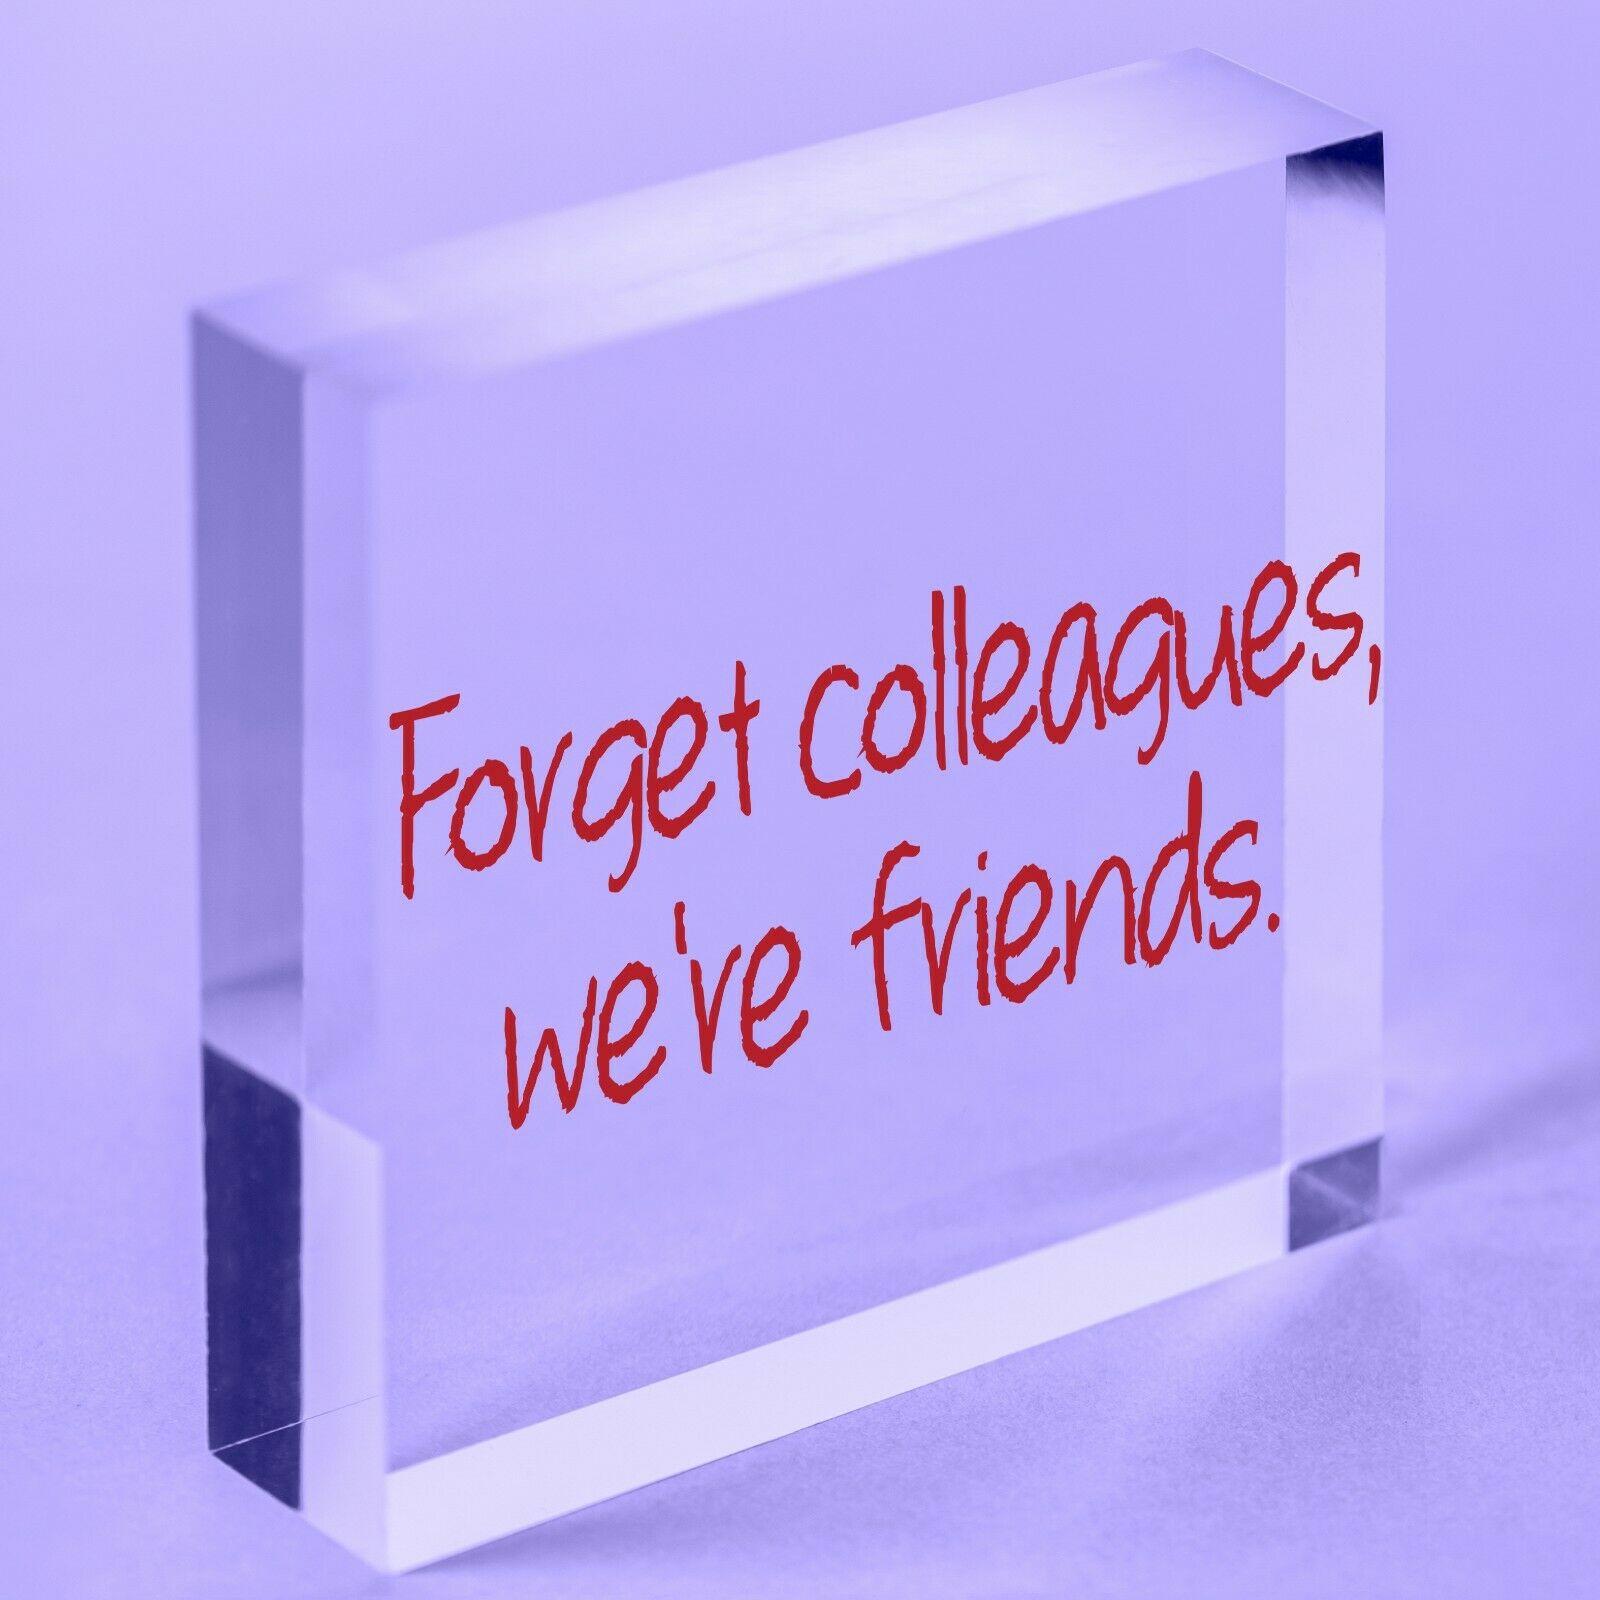 Chance Made Us Colleagues Friendship Heart Gift Acrylic Block Best Friend Sign